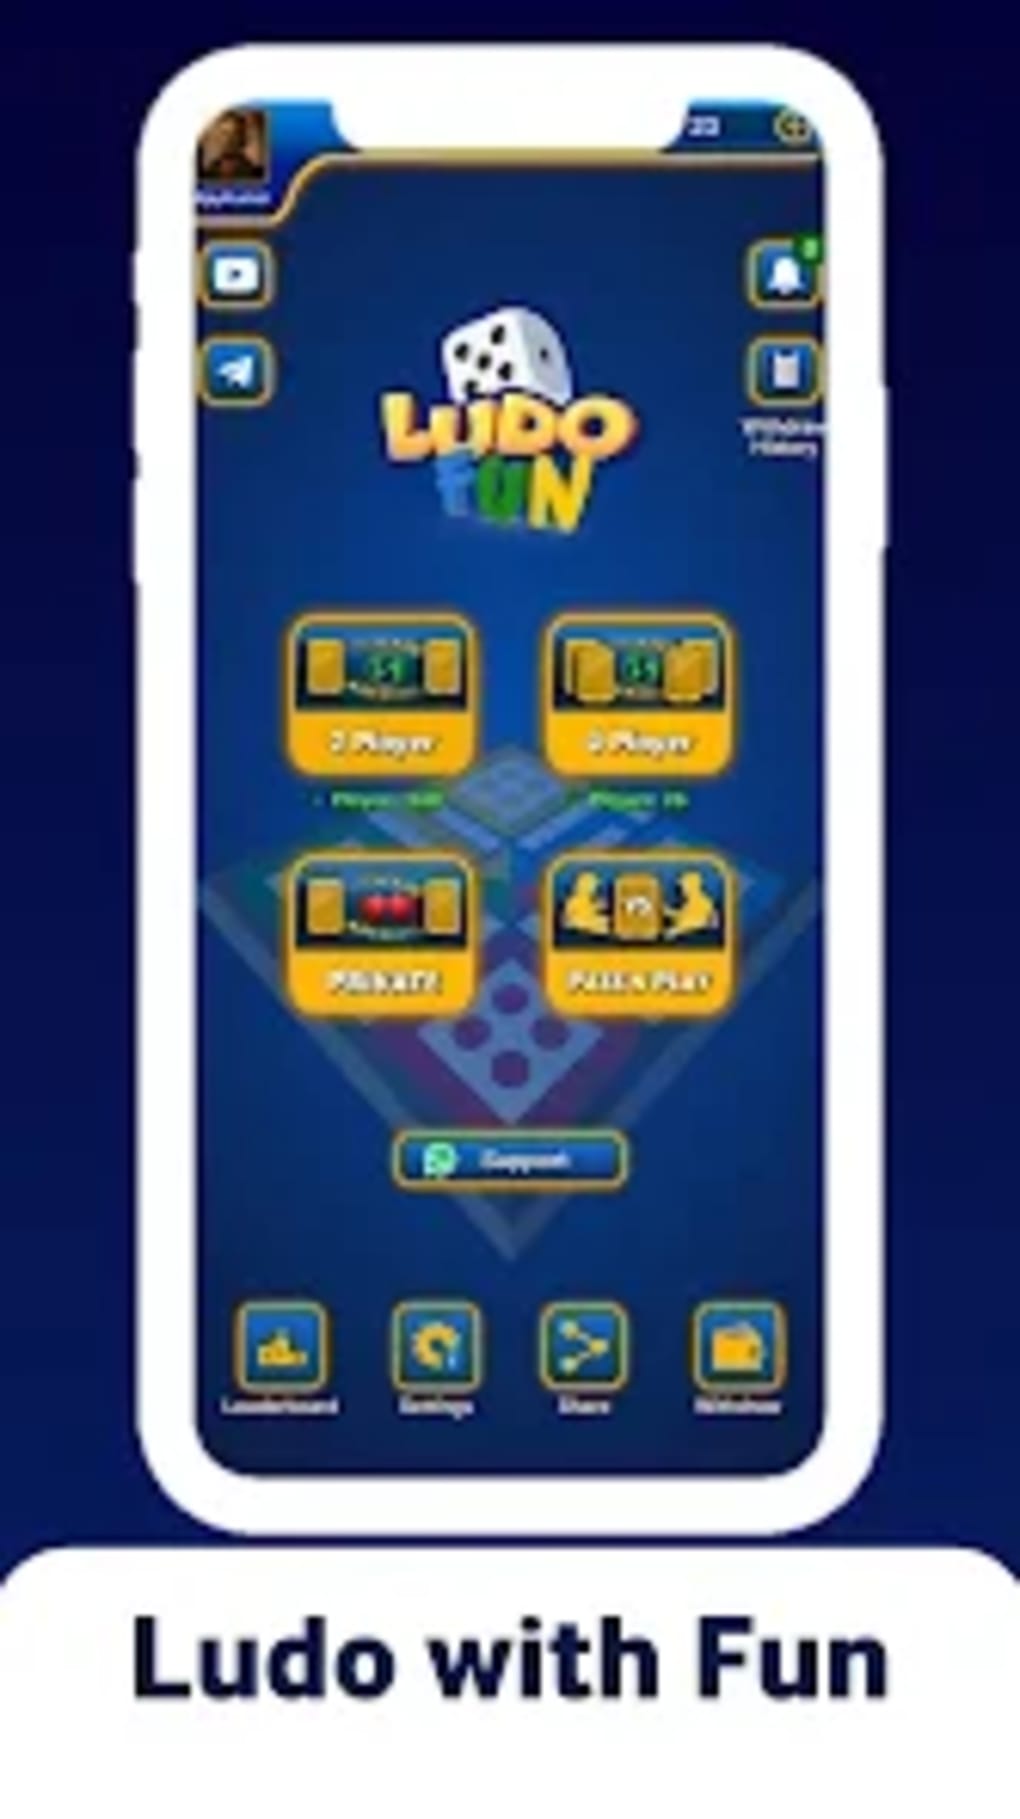 Ludo King - Theme of the month for  India Prime